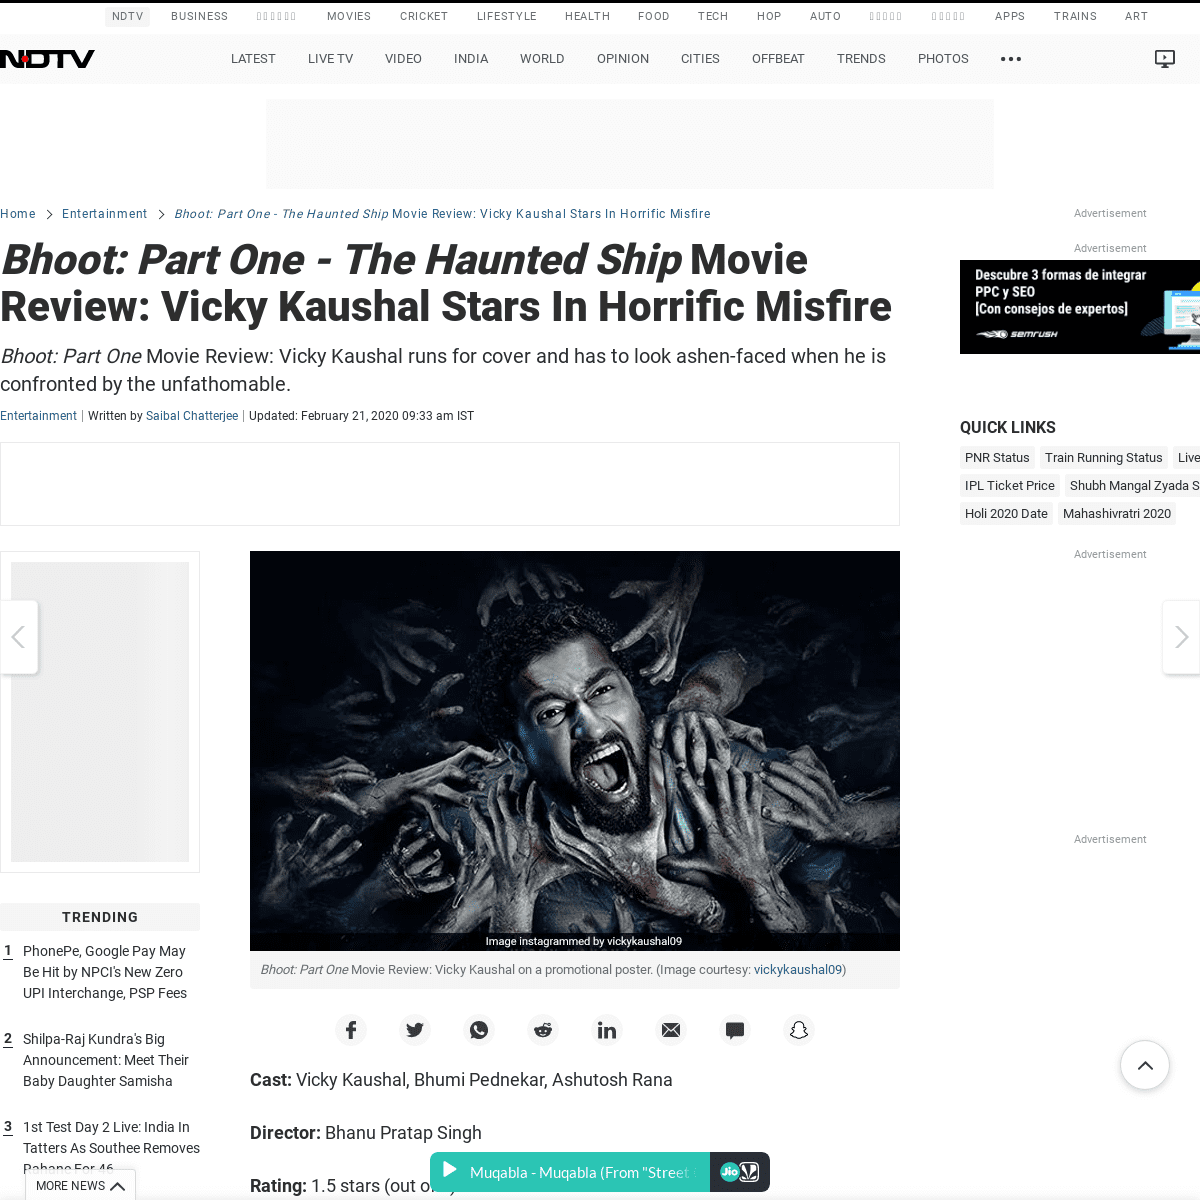 A complete backup of www.ndtv.com/entertainment/bhoot-part-one-the-haunted-ship-movie-review-vicky-kaushal-stars-in-horrific-mis